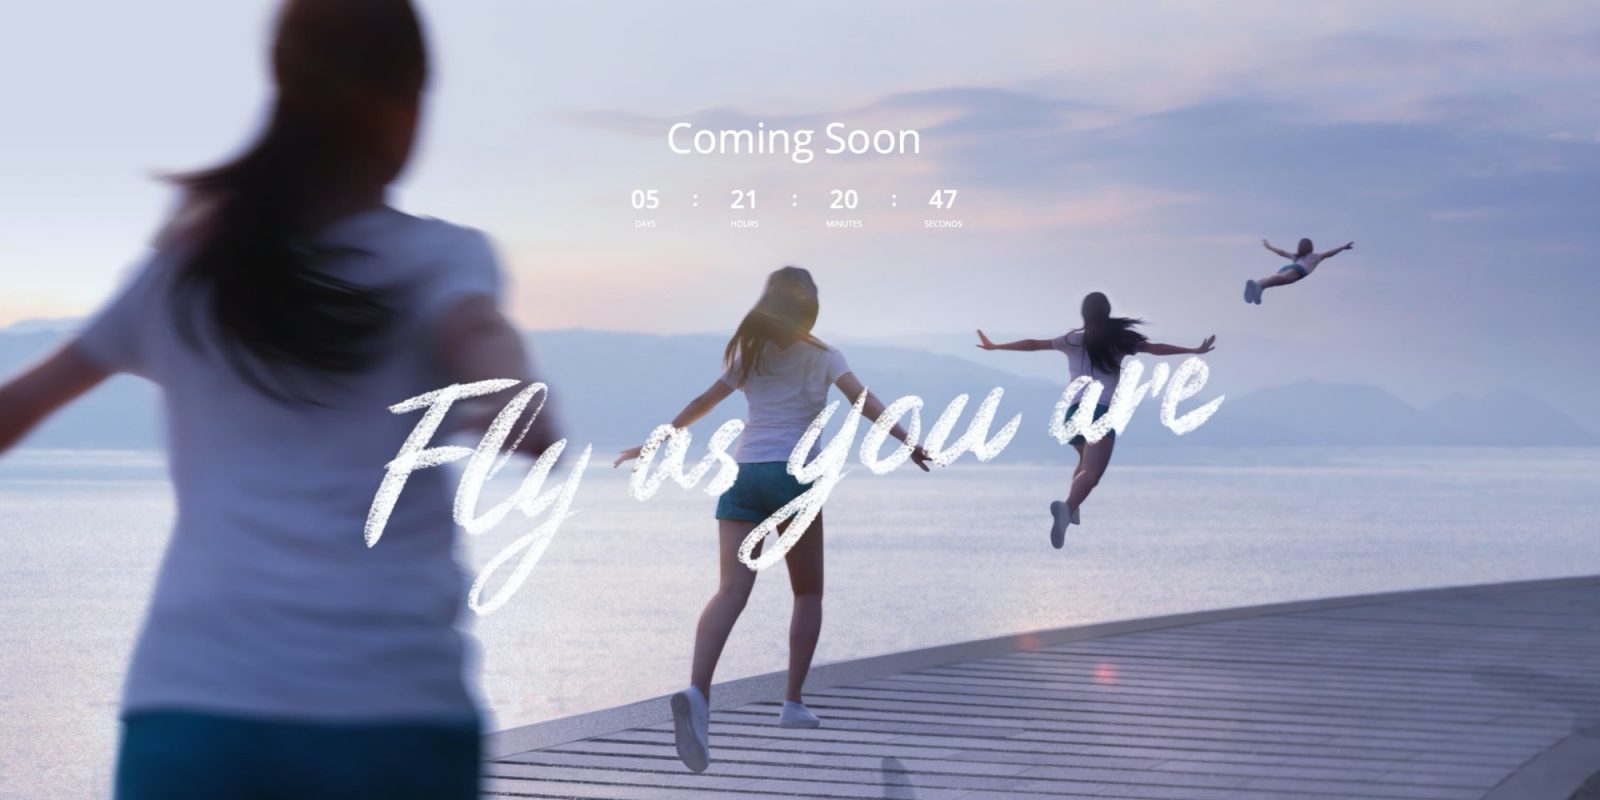 DJI-announcement-Fly-as-you-are-9am-EDT-October-30th.jpg